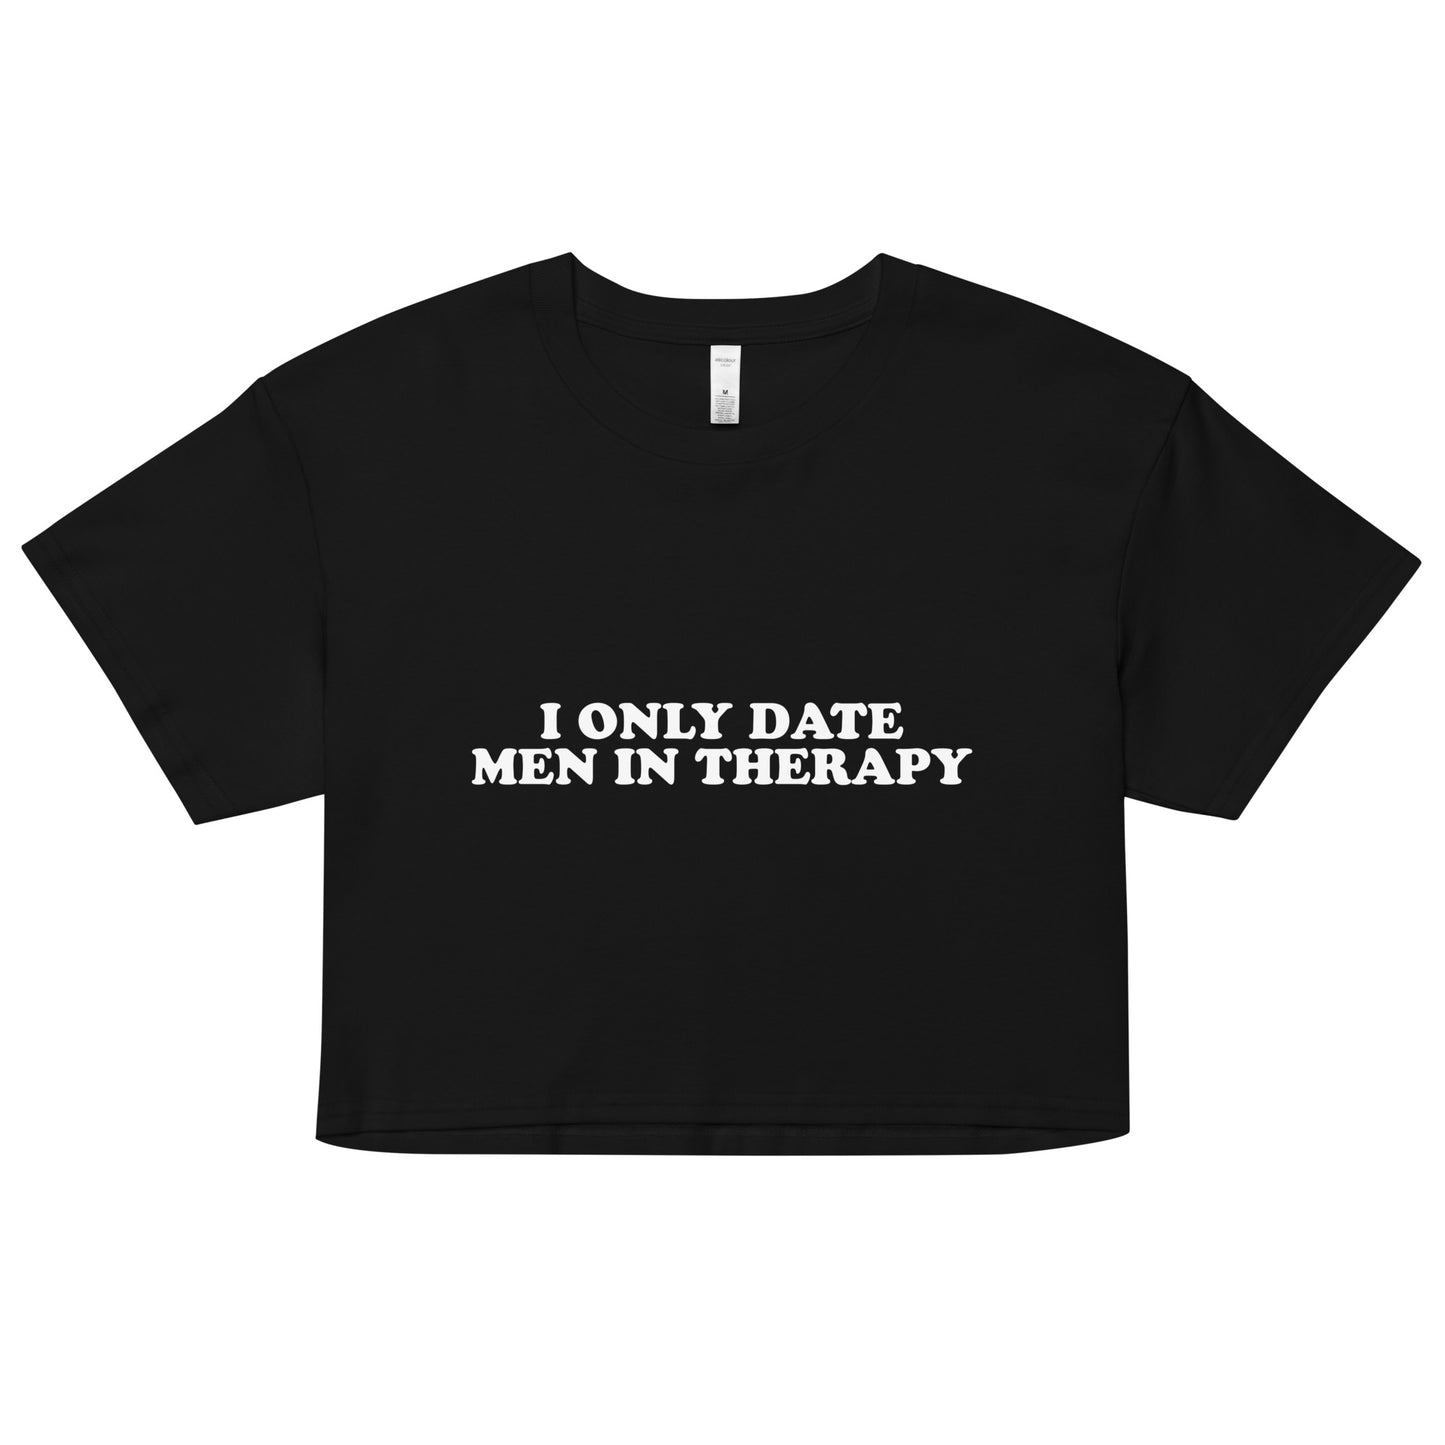 I Only Date Men in Therapy Women’s crop top